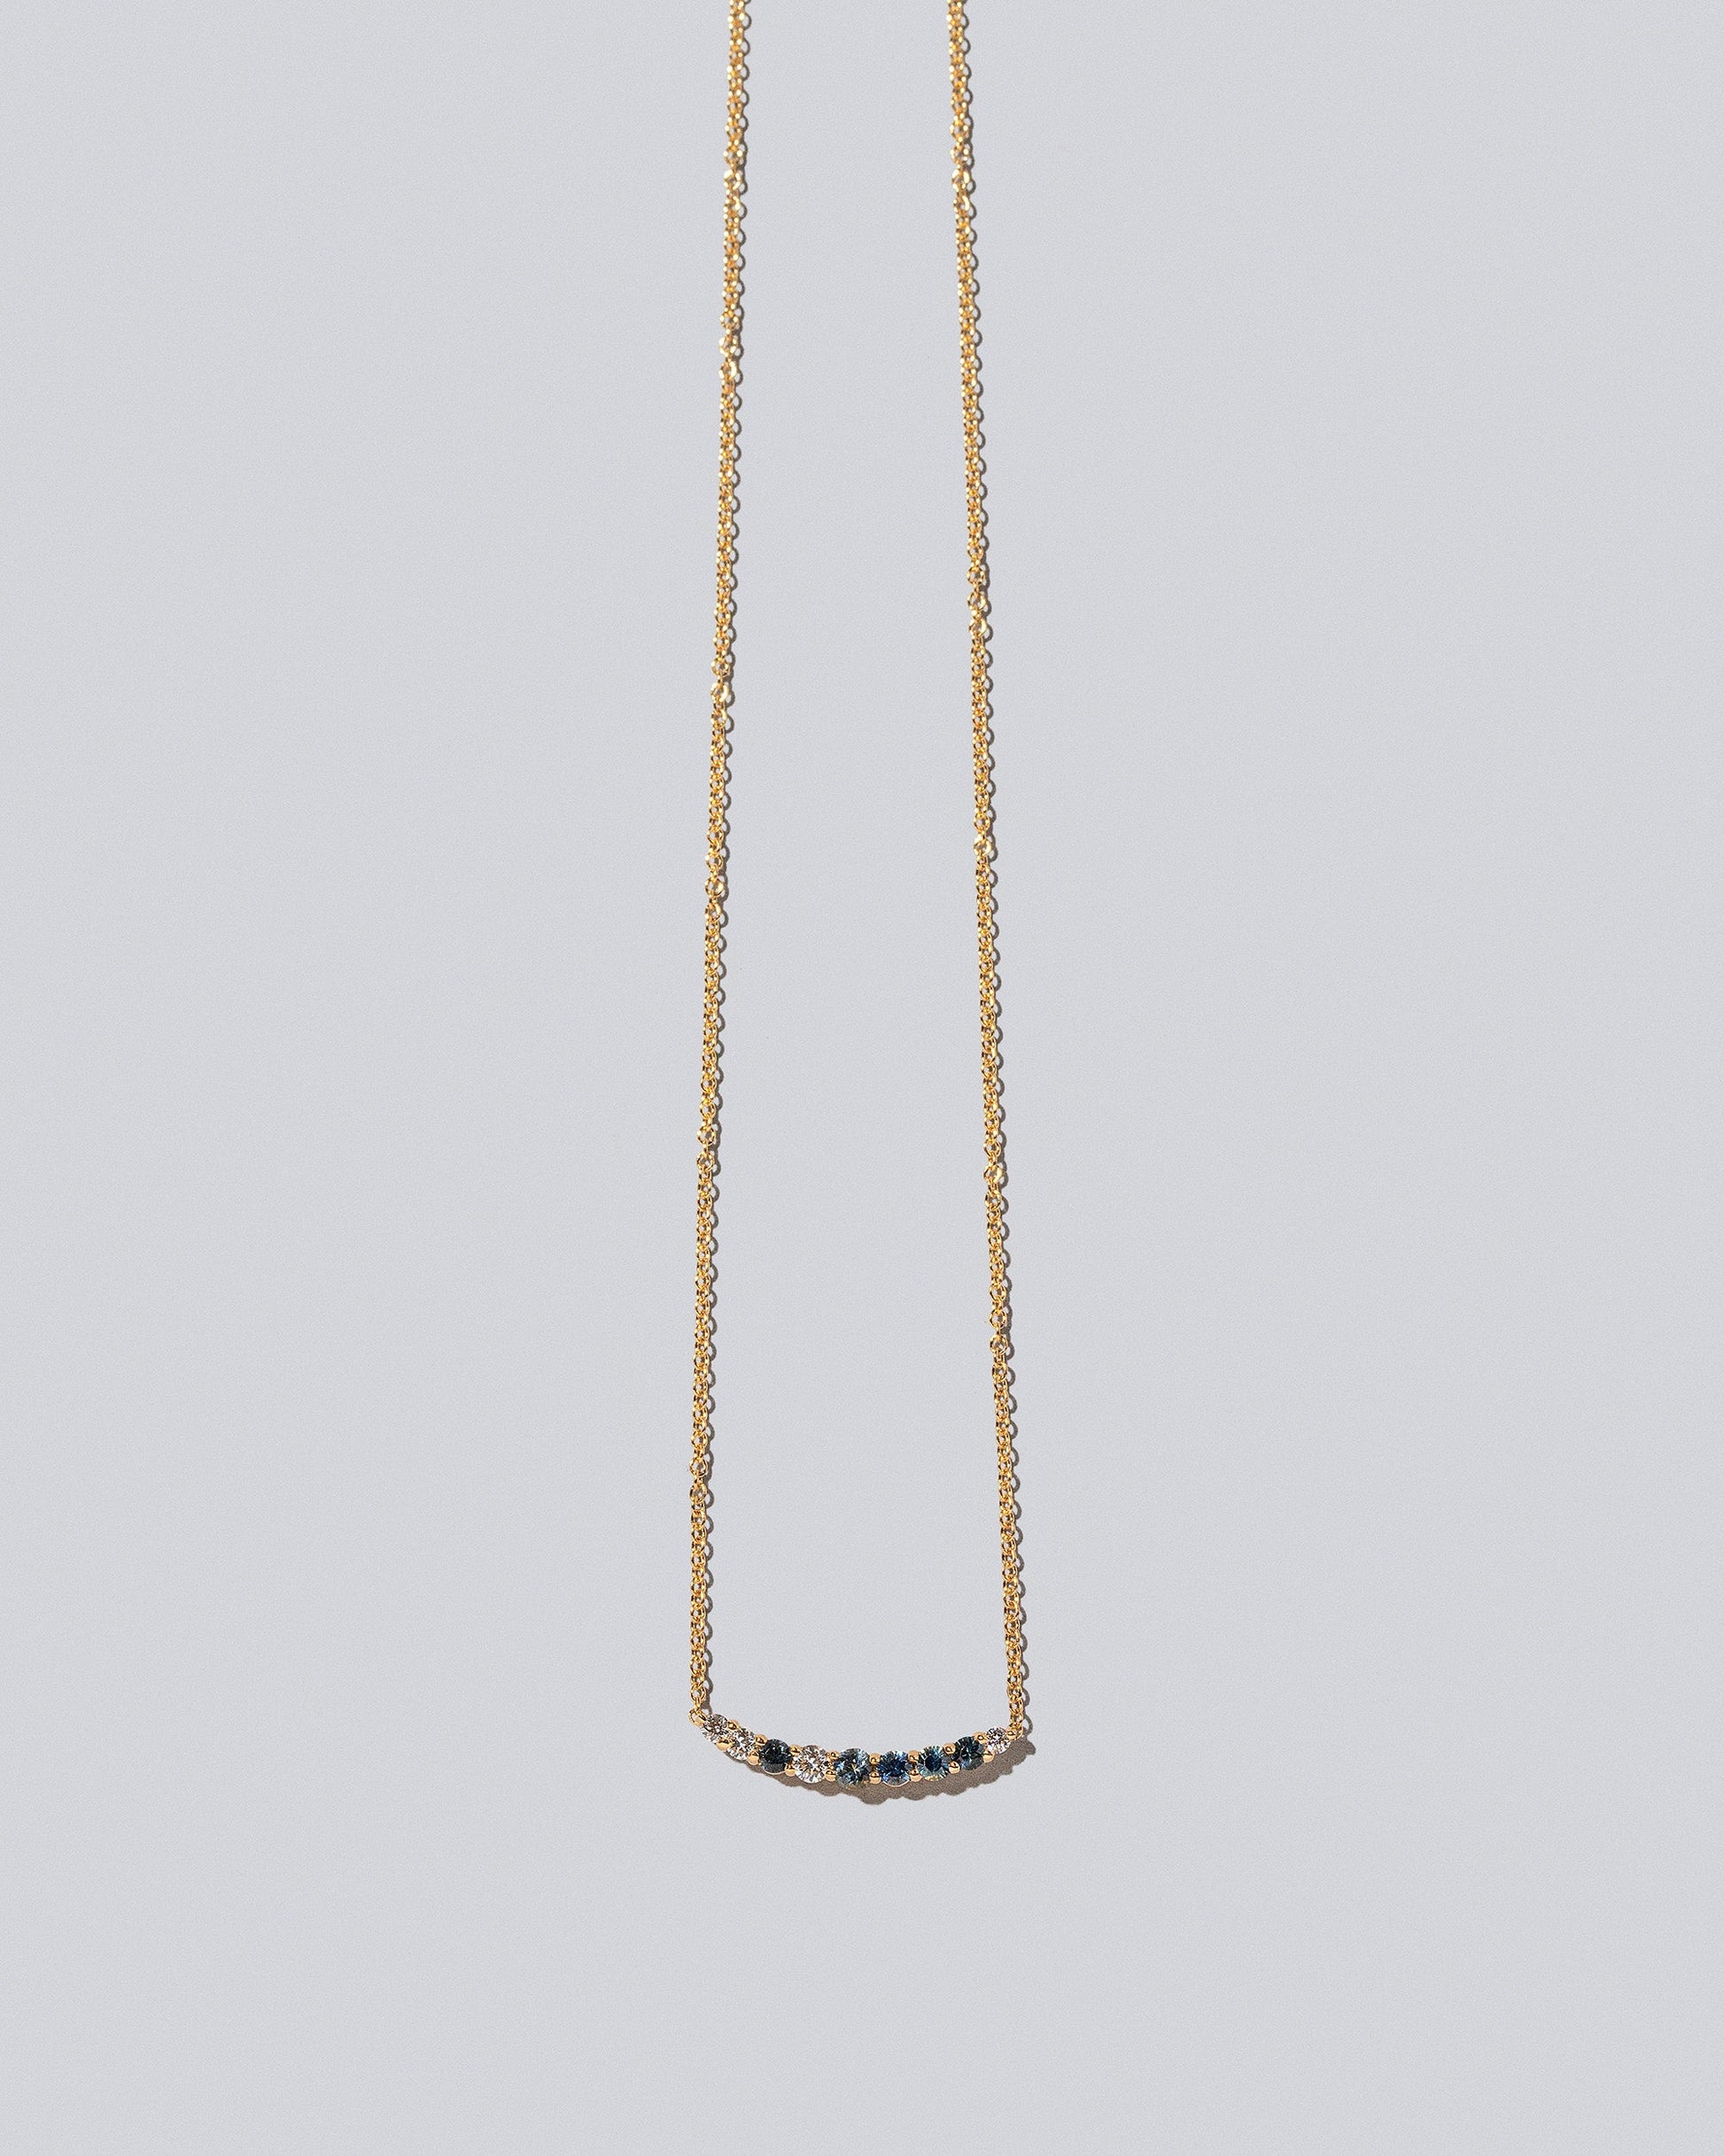 Crescent Necklace - Sapphire and White Diamond on light colored background.